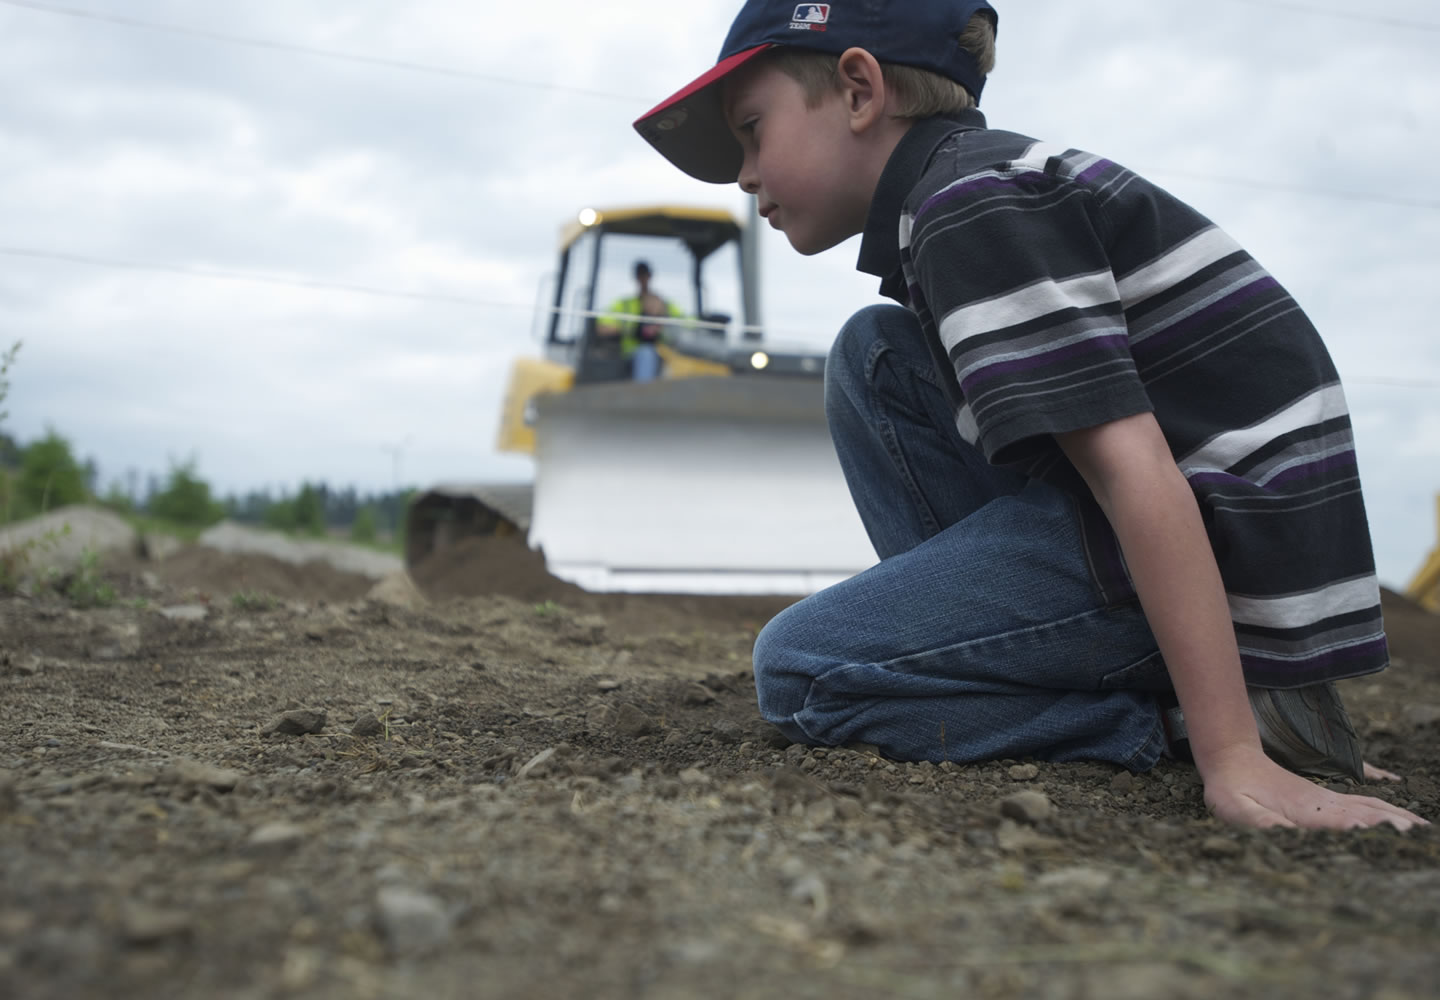 Derek Fechtner, 6, of Woodland, waits patiently in line for his chance to drive a full-sized bulldozer during the annual Dozer Days fundraiser at the Cemex/Fisher Quarry in 2012.